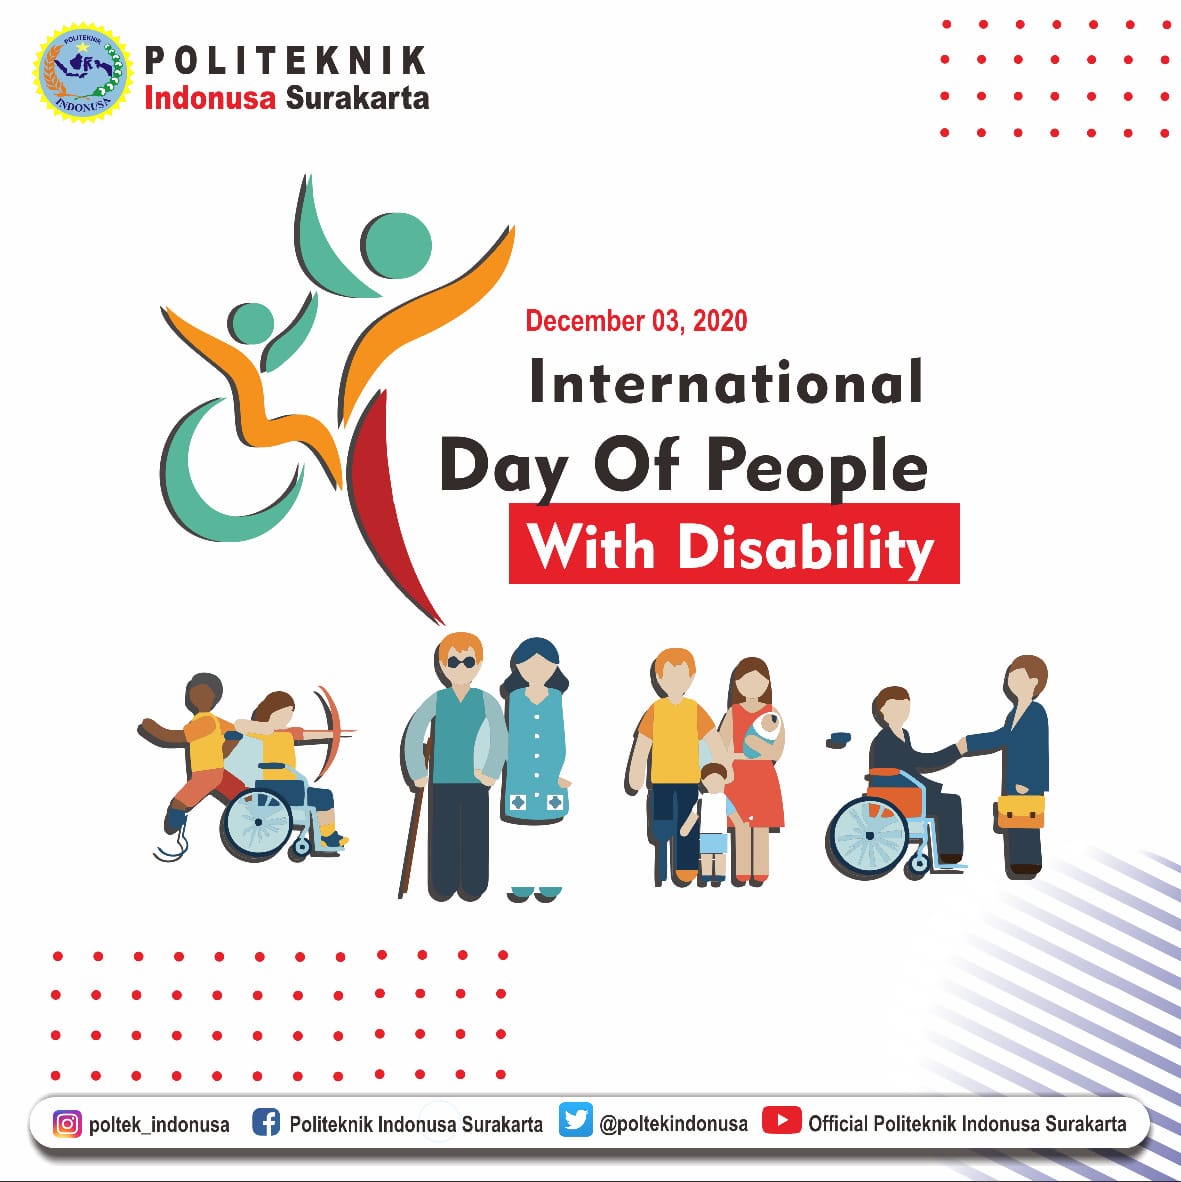 Commemorating International Disability Day